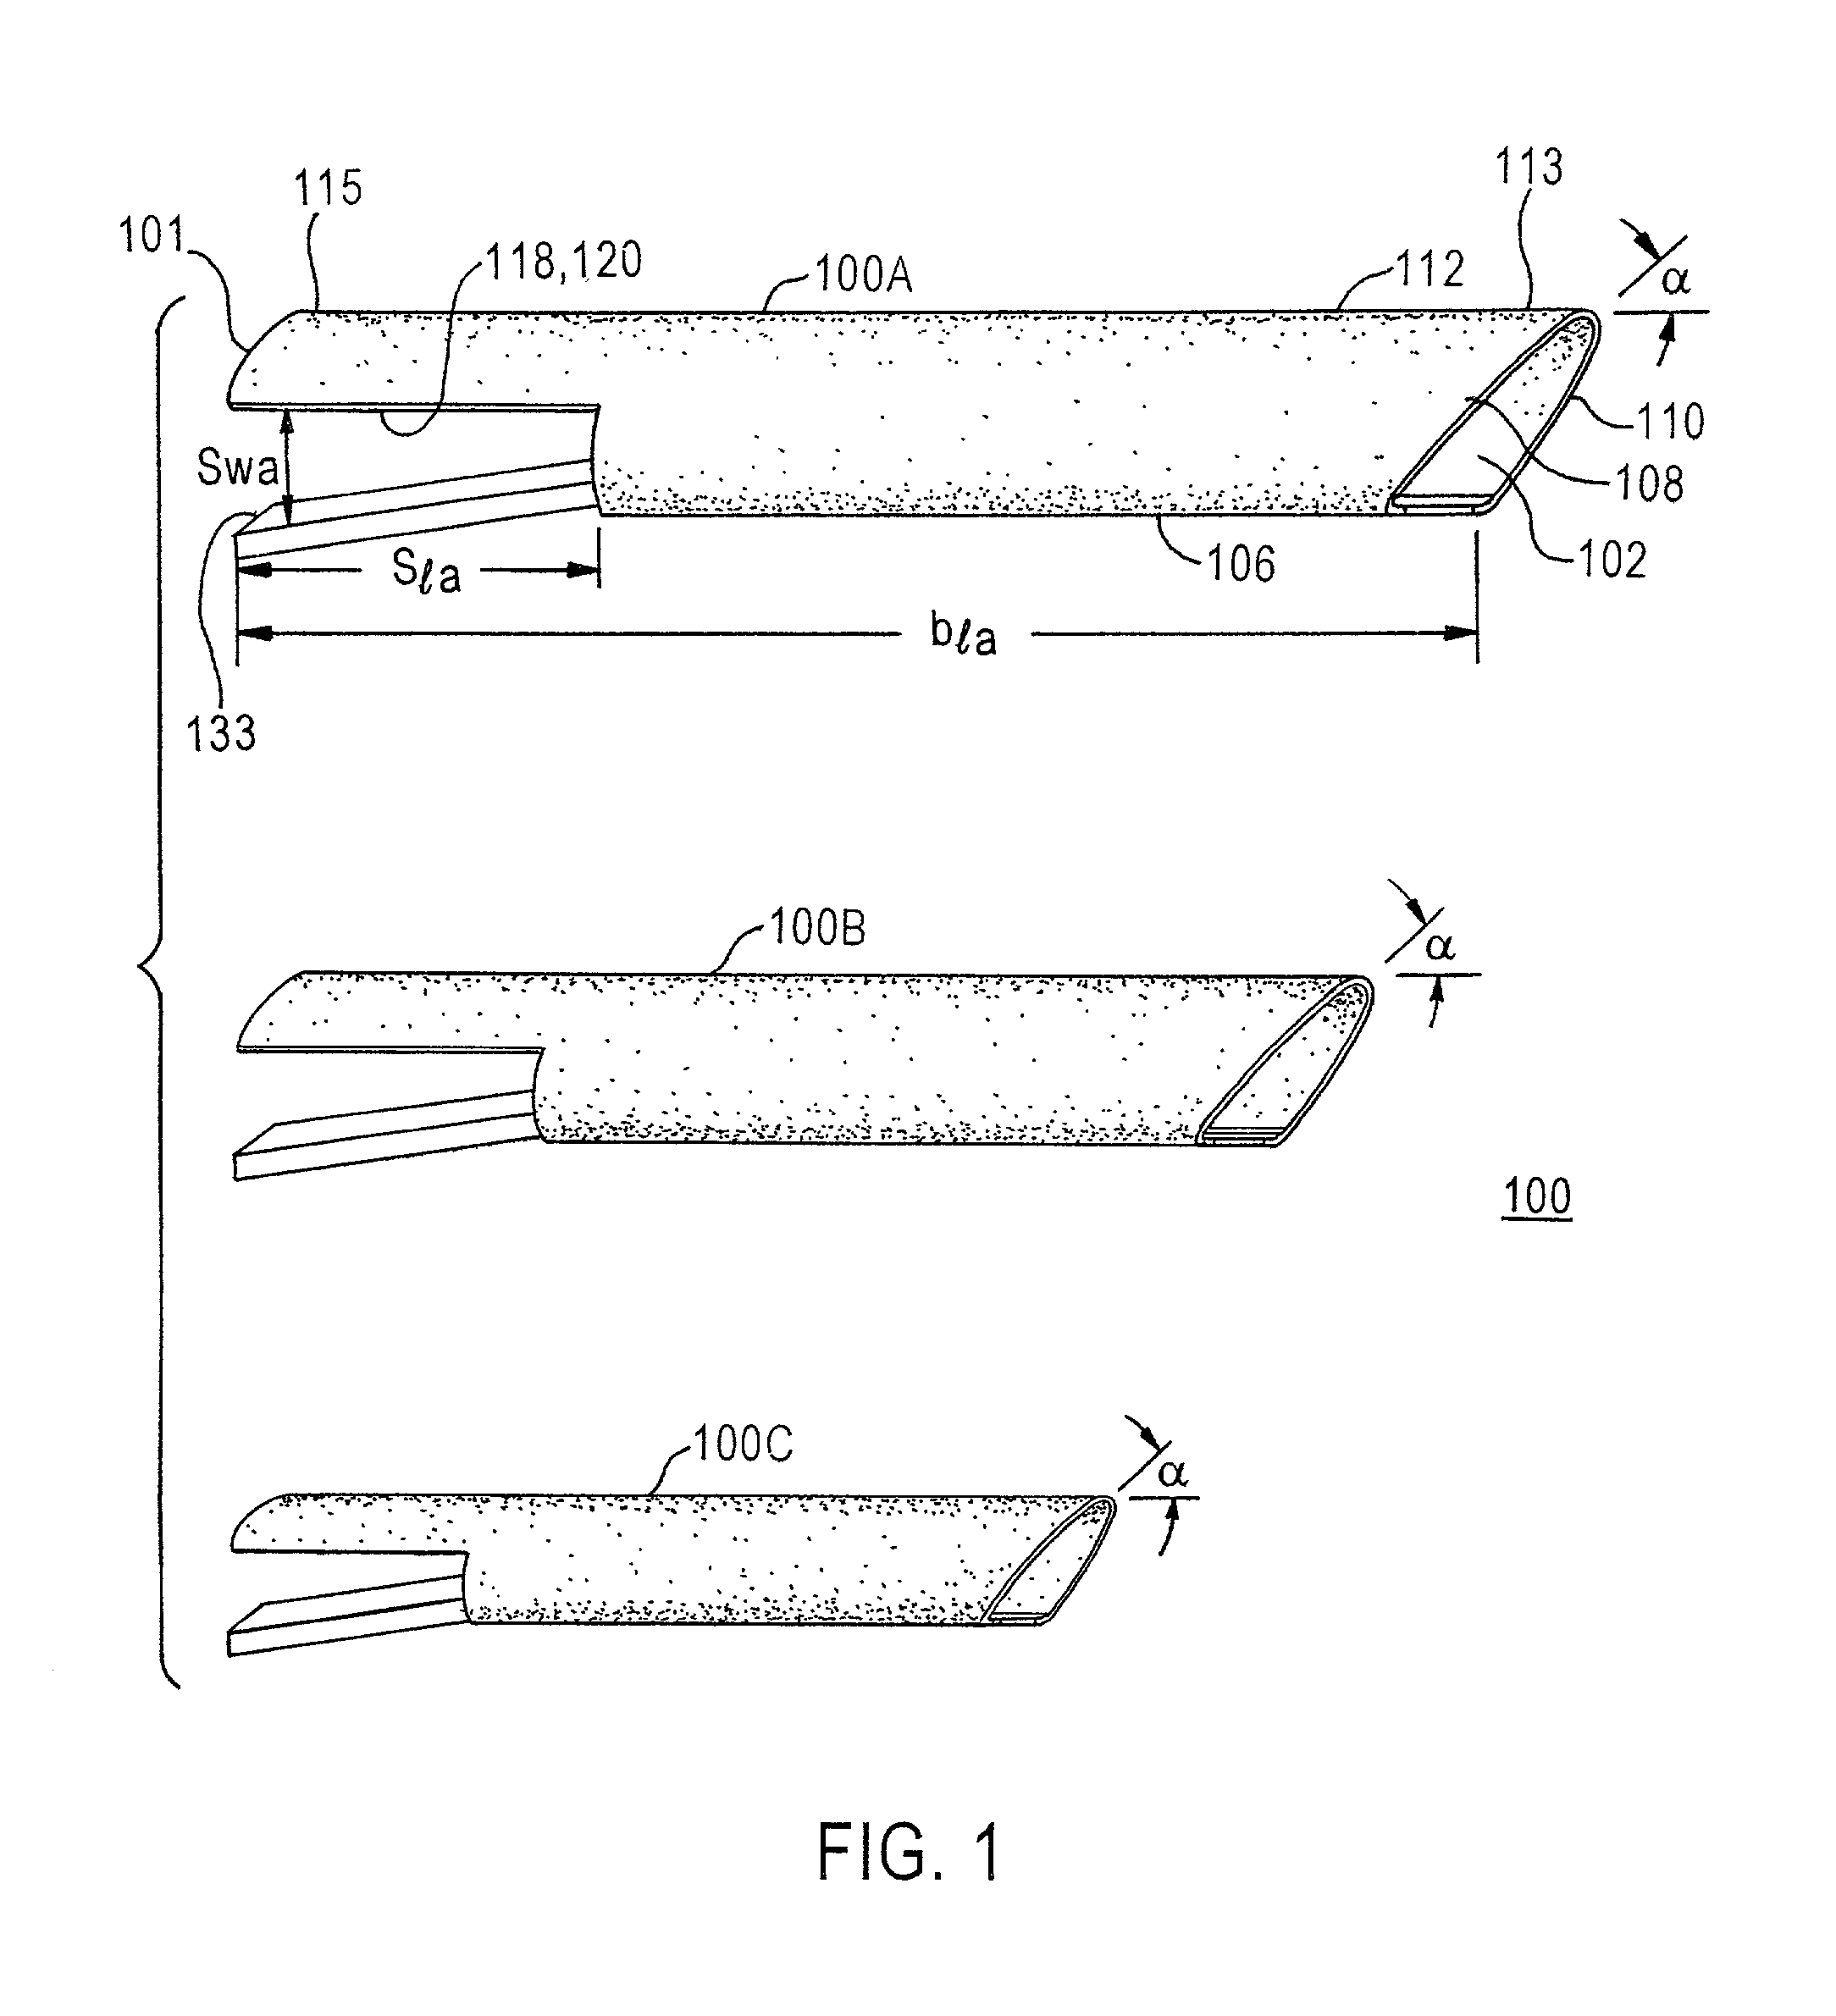 Universal modular glottiscope system having intra-wall channels for vocal fold microsurgery or orotracheal intubation